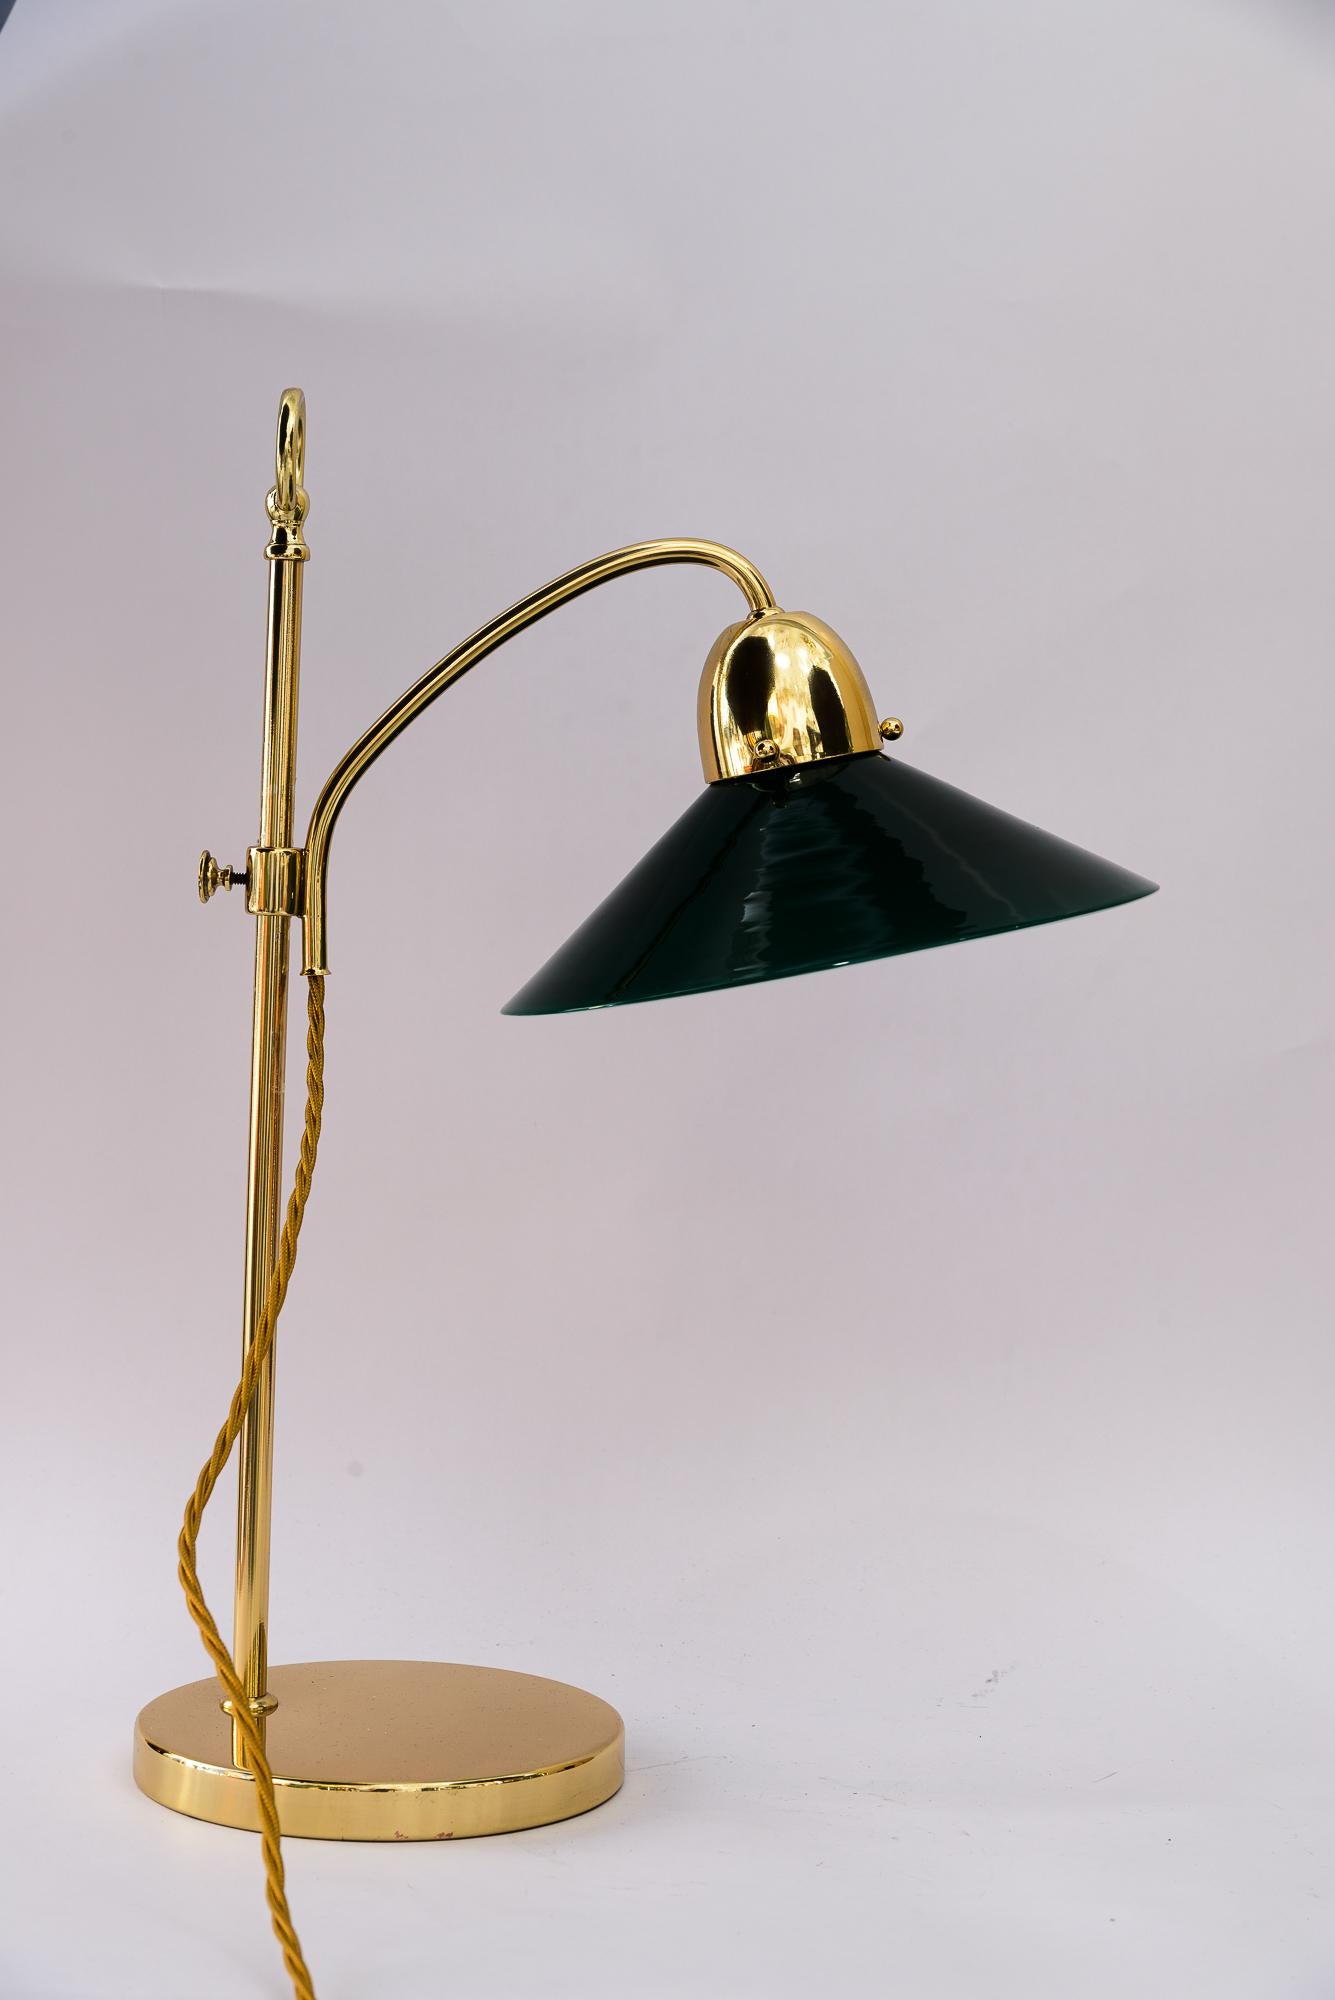 Rare Art Deco hight adjustable condor table lamp with original glass shade 1920s For Sale 4